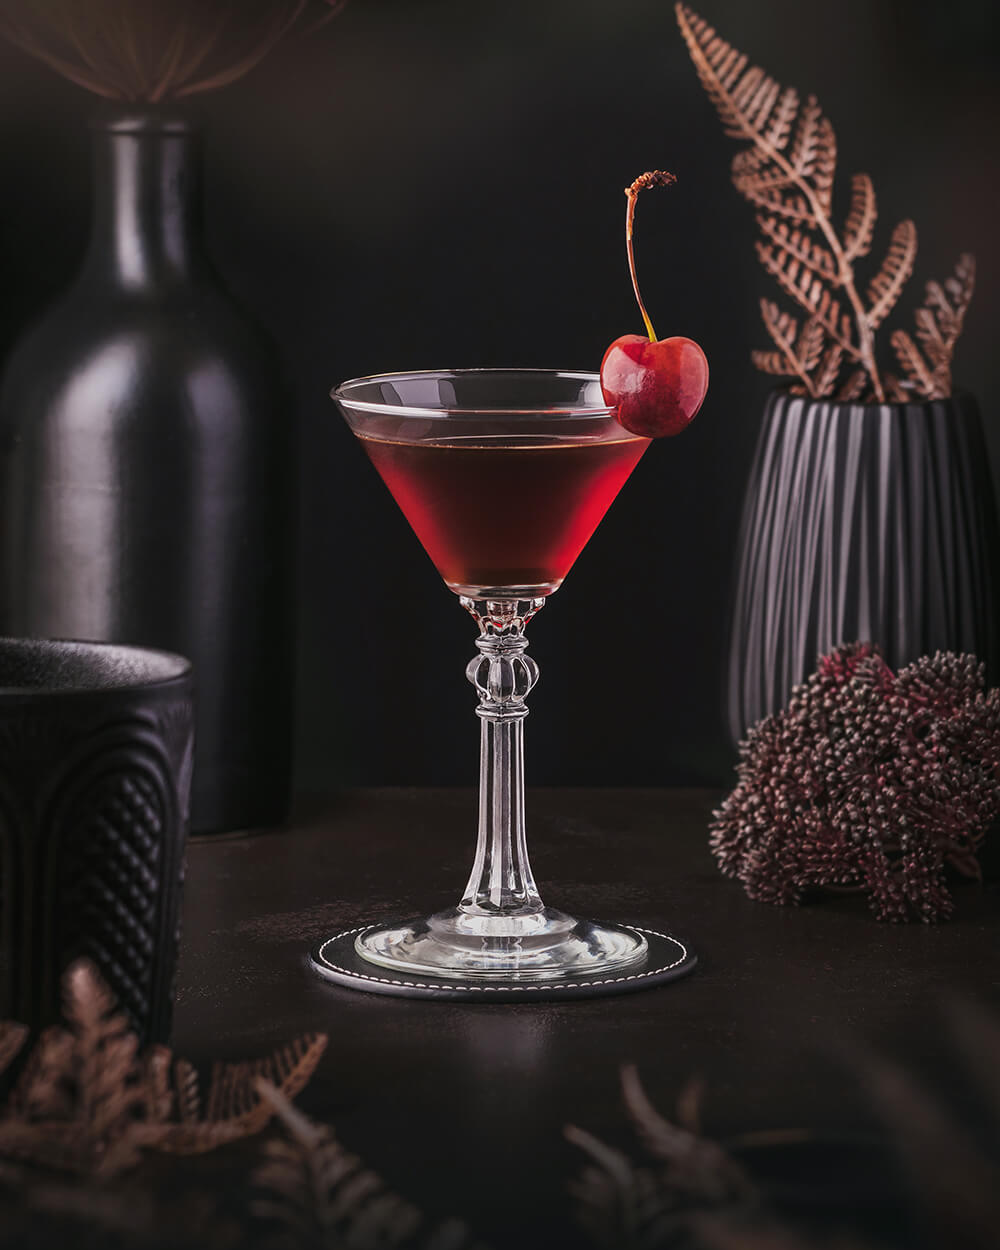 Remember the Maine - Manhattan twist with absinthe and cherry. Deep red cocktail with a cherry garnish.